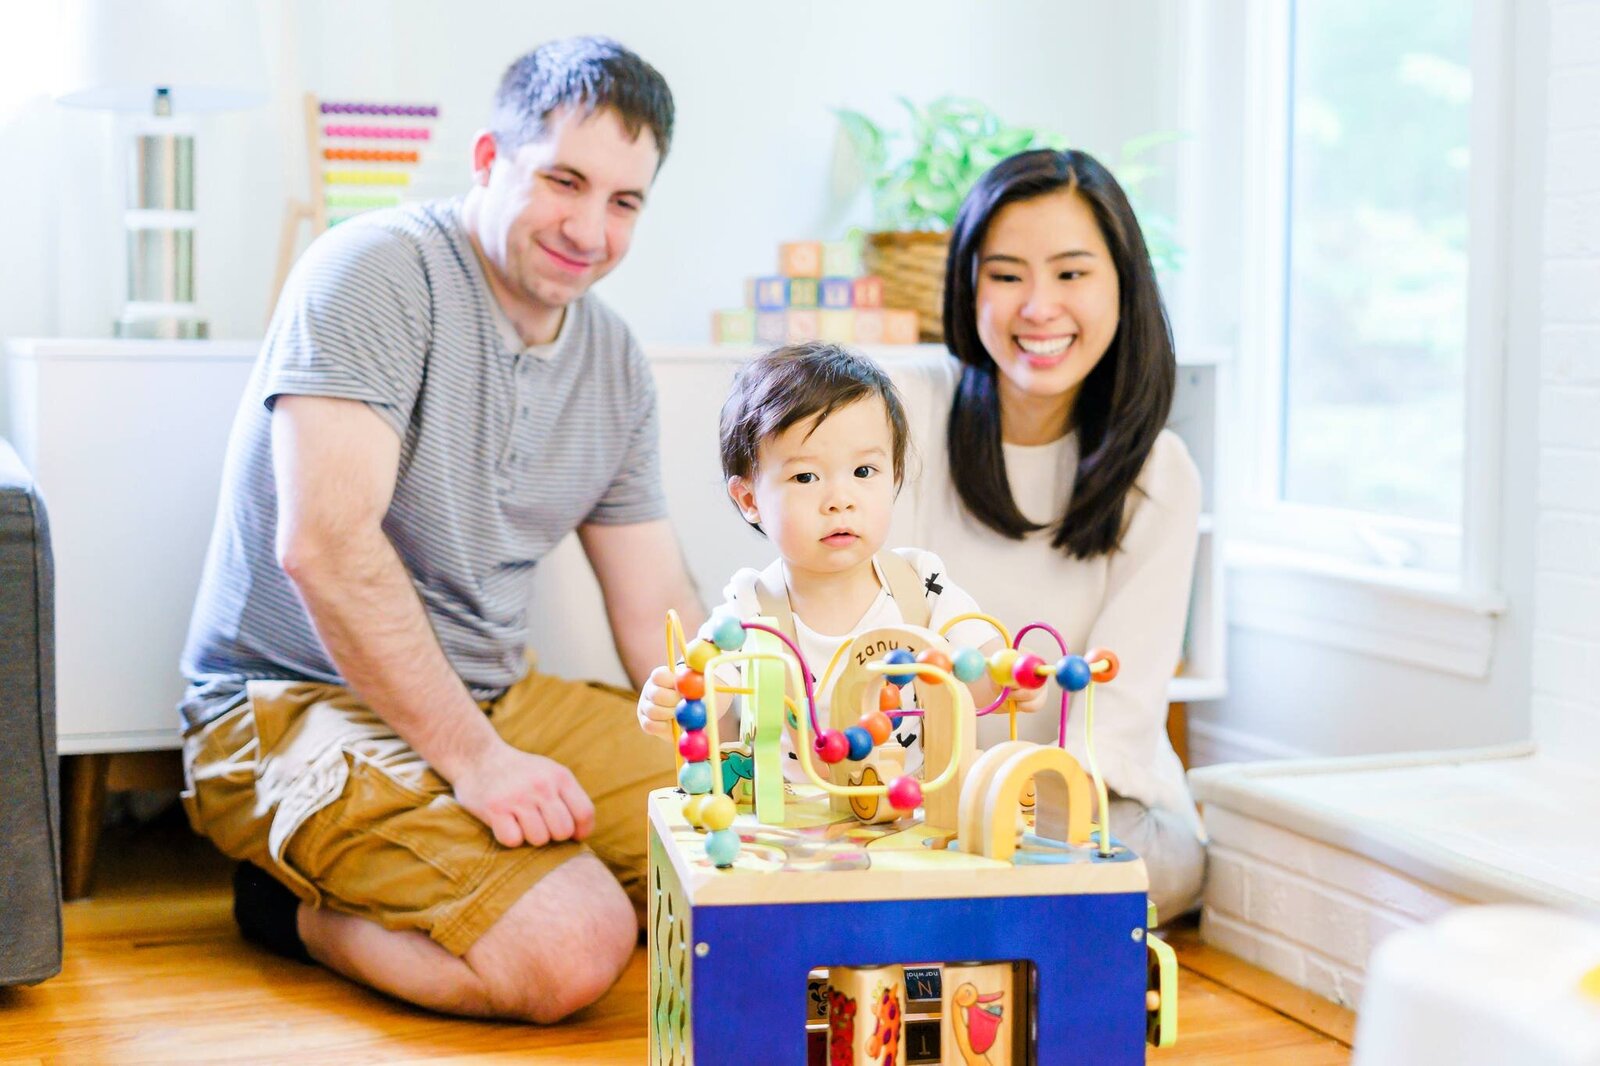 New England area family with baby playing with toys